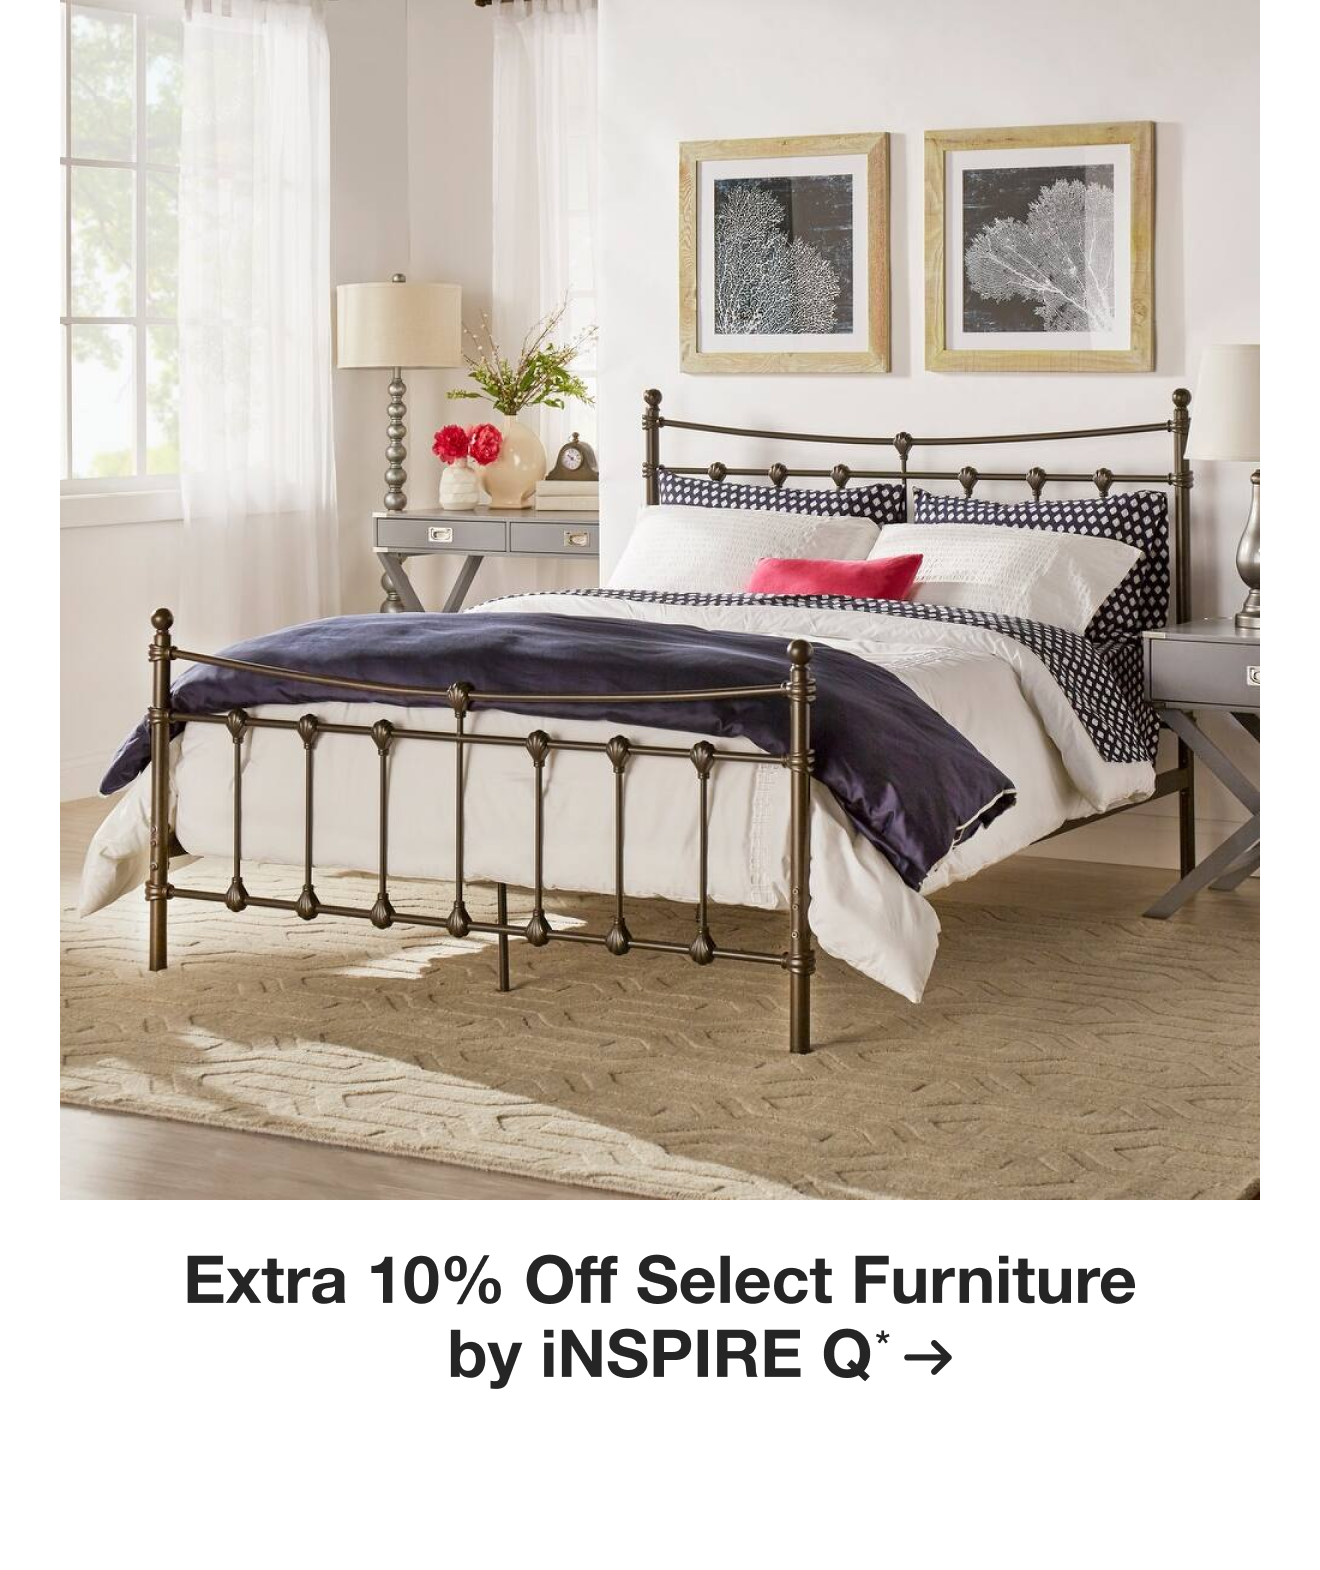 Extra 10% off Select Furniture by iNSPIRE Q*